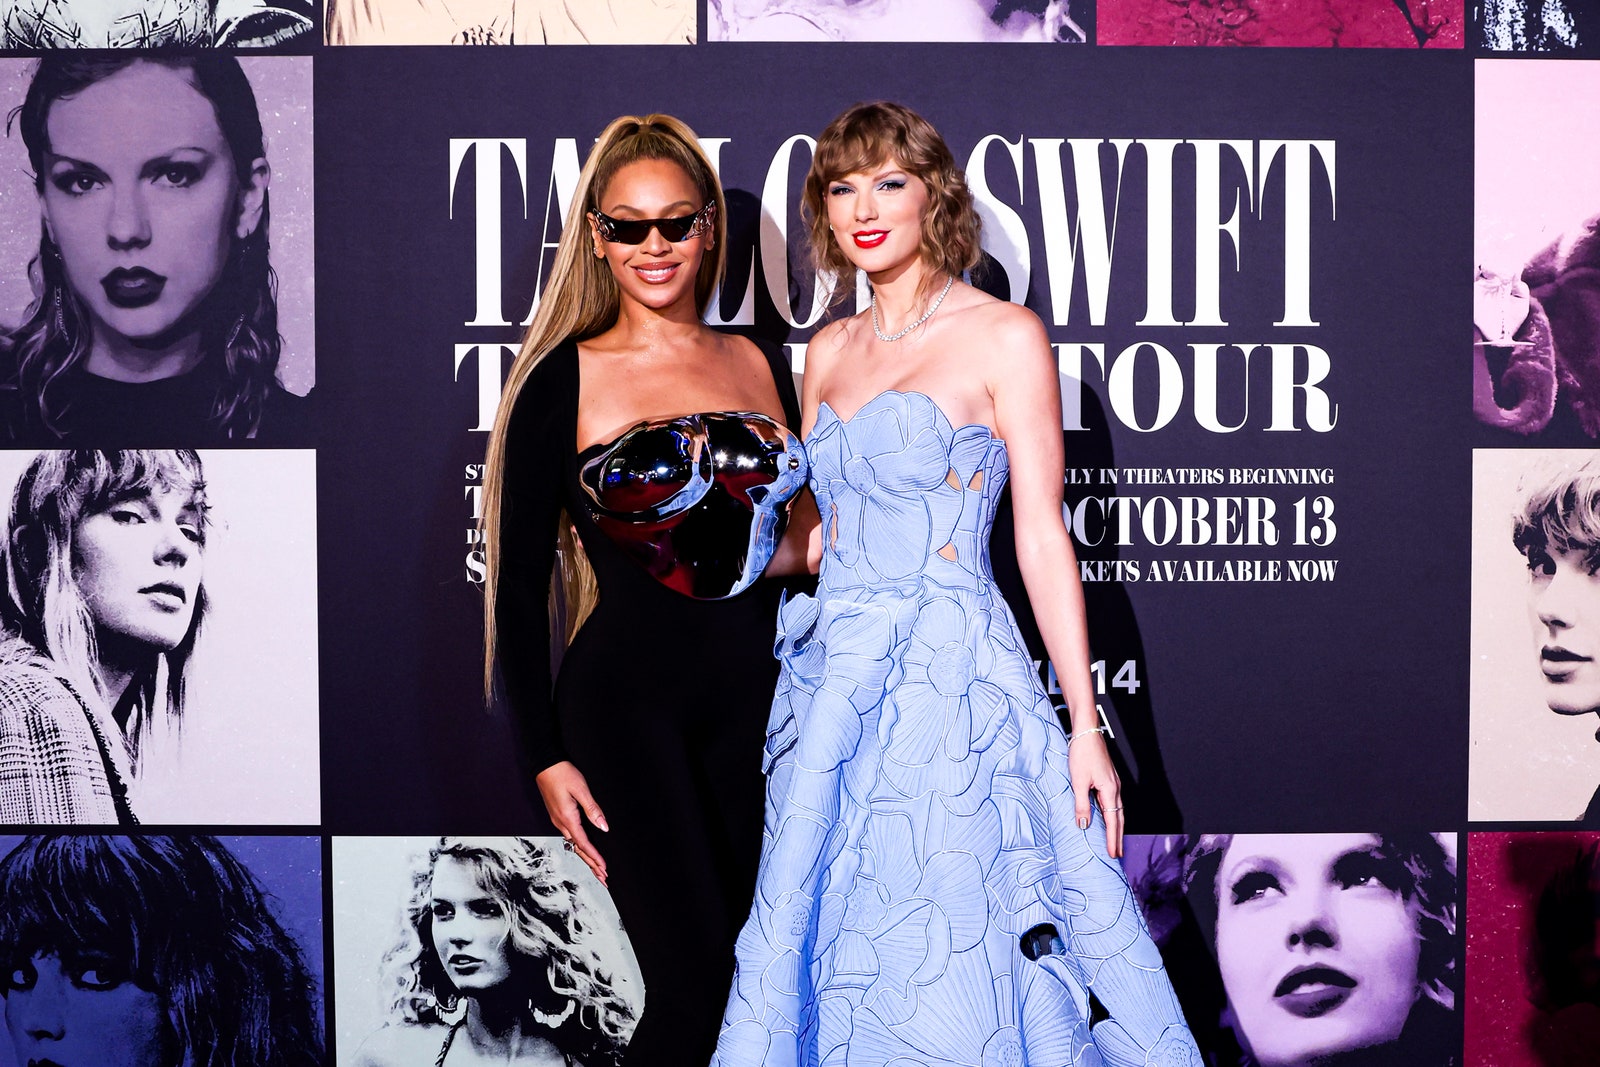 Taylor Swift and Beyoncé Are Resurrecting the American Movie Theater